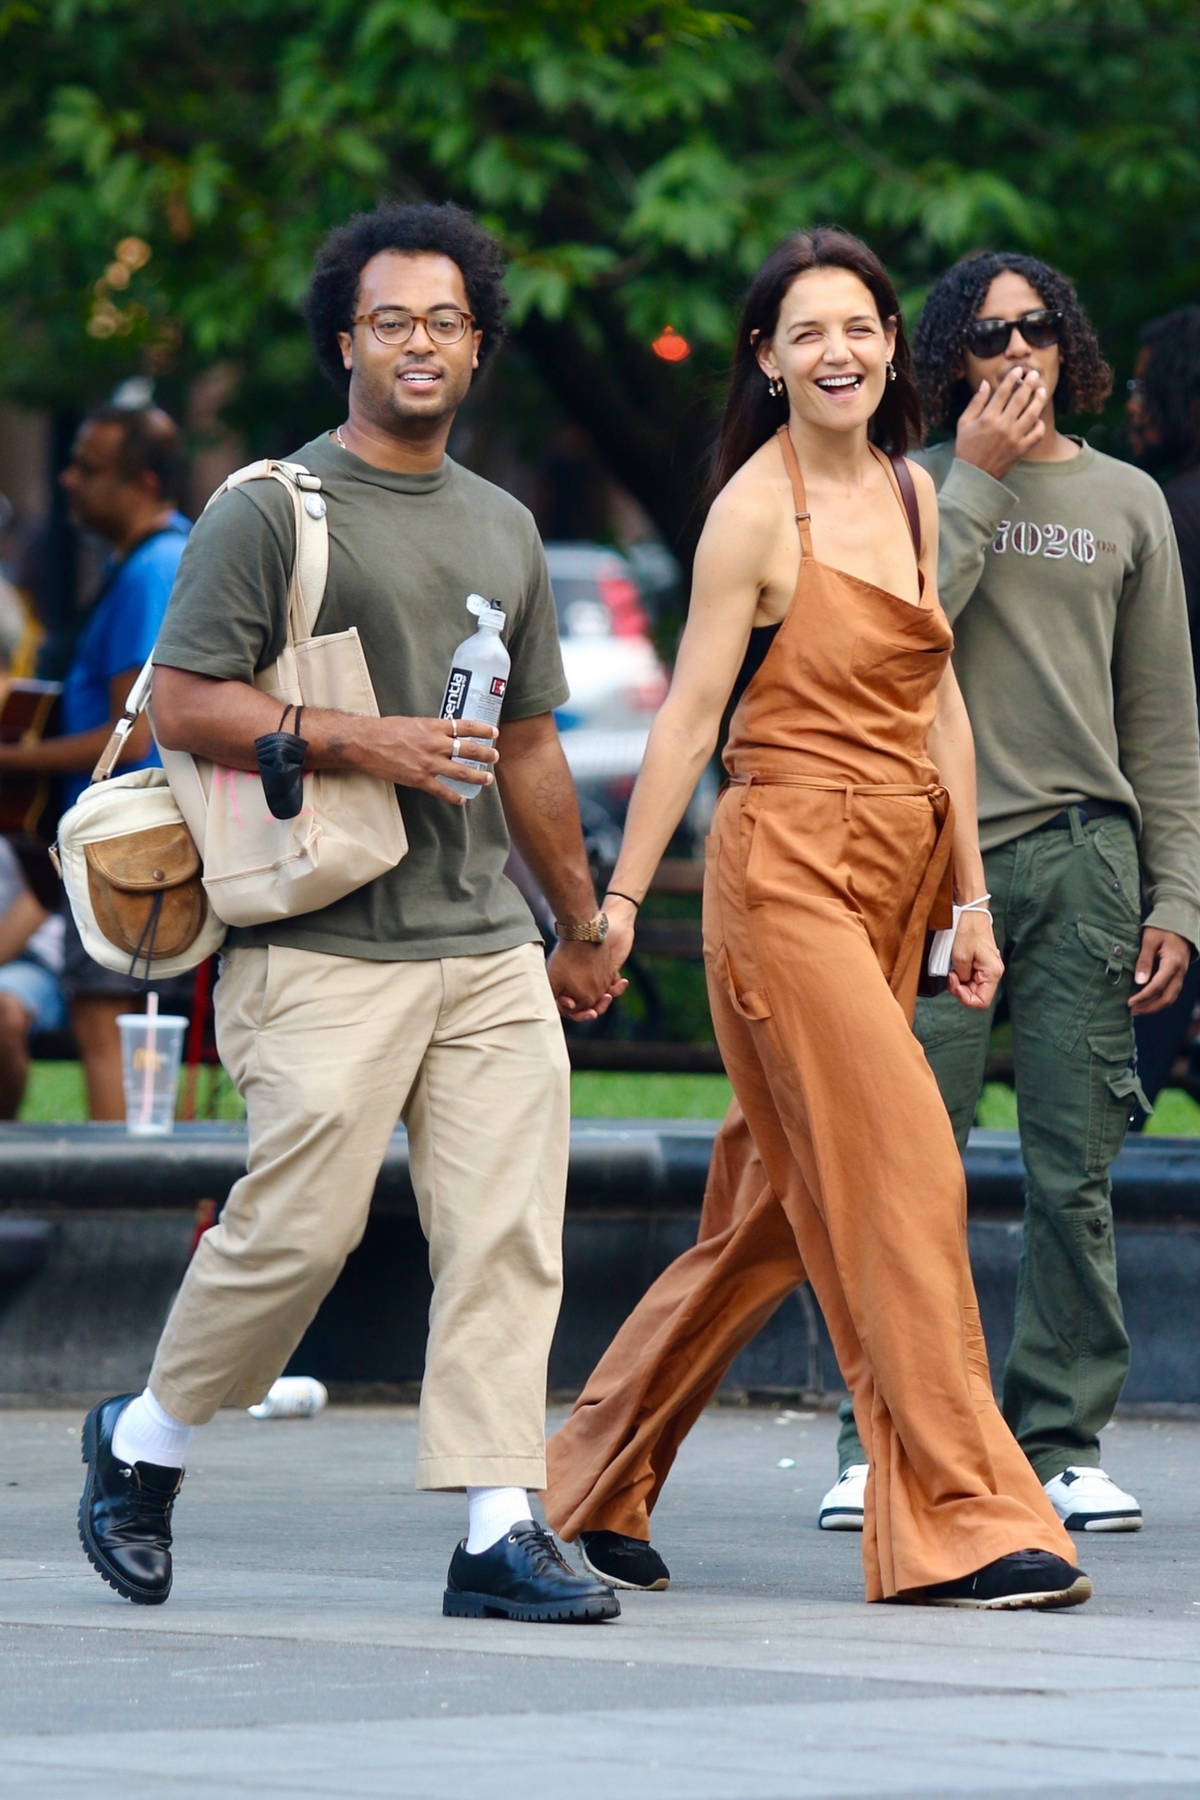 katie holmes is all smiles during a romantic stroll with boyfriend bobby  wooten iii in new york city-060822_6